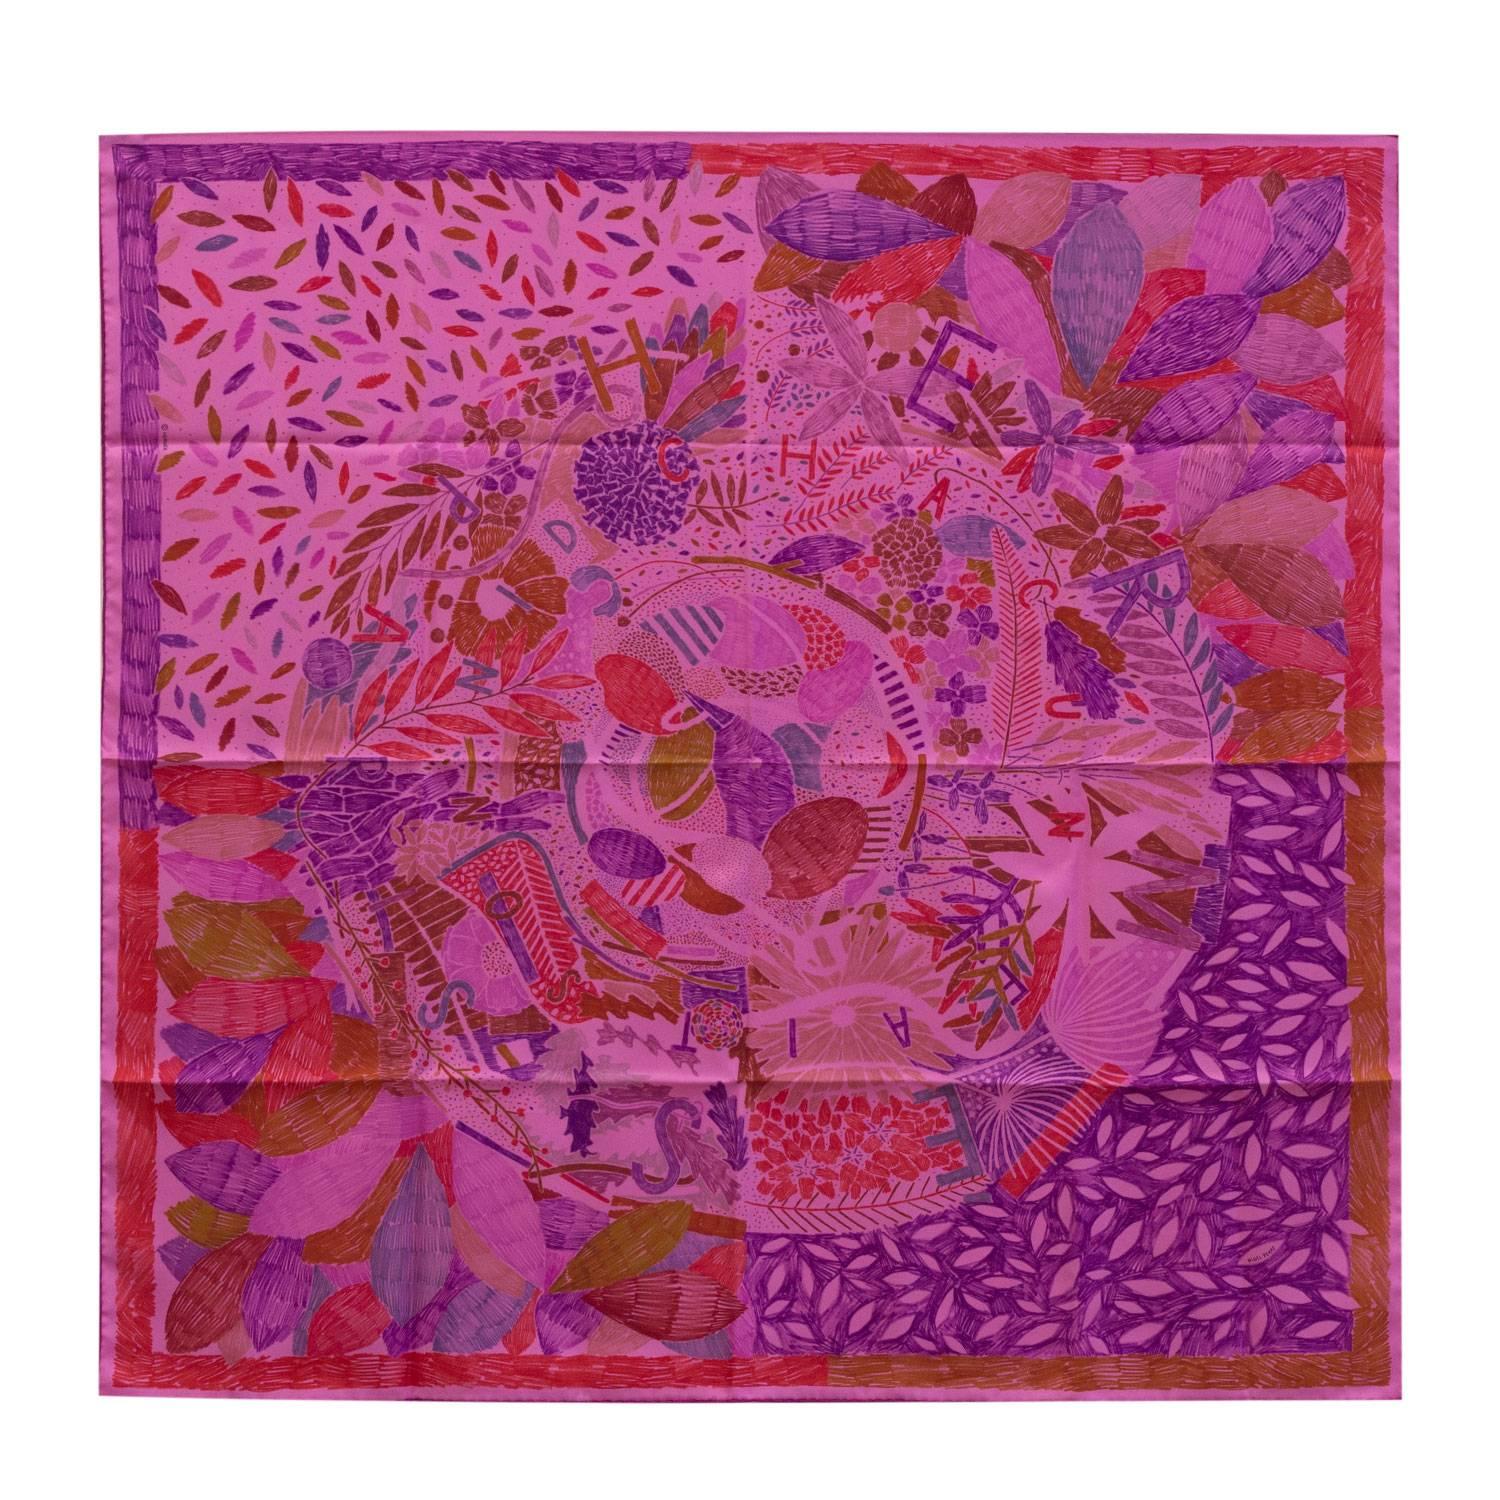 Hermes Scarf "Carre" 100% Silk "Chacun fait son nid" by Nigel Peake 2016 For Sale